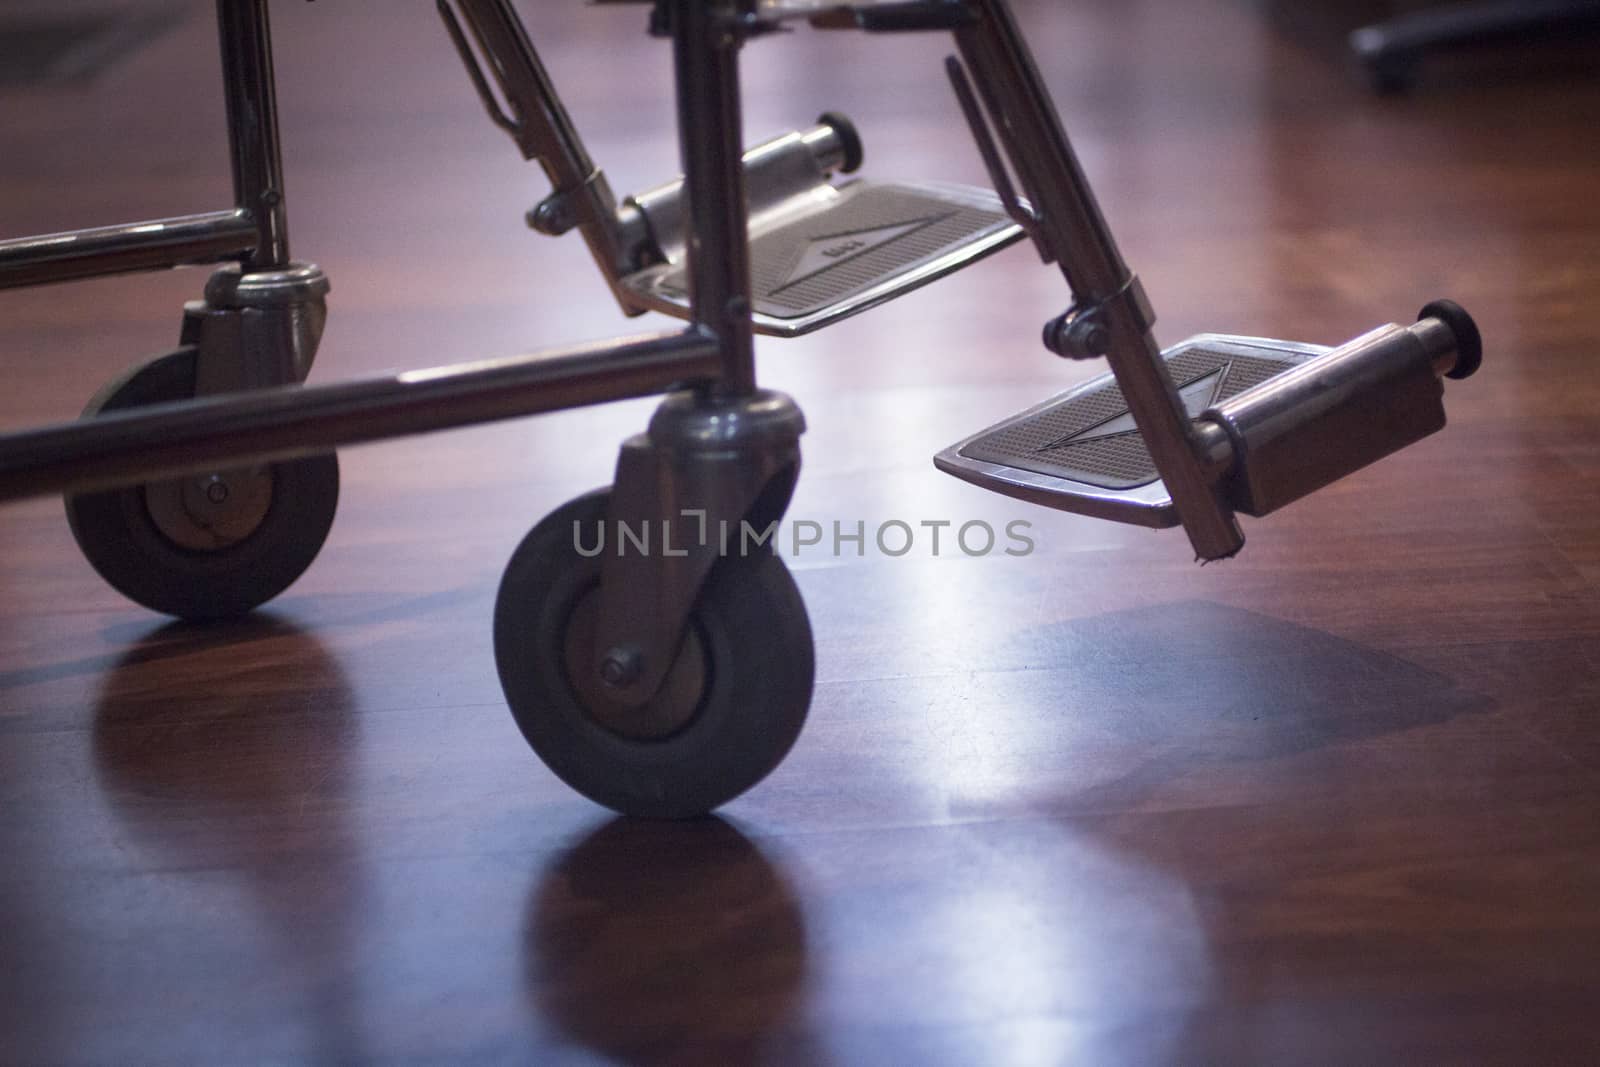 Wheel chair wheels and foots rests in hospital clinic artistic in semi silhouette with waiting room defocused behind. Color digital photo in purple blue tones shot with shallow depth of focus. 